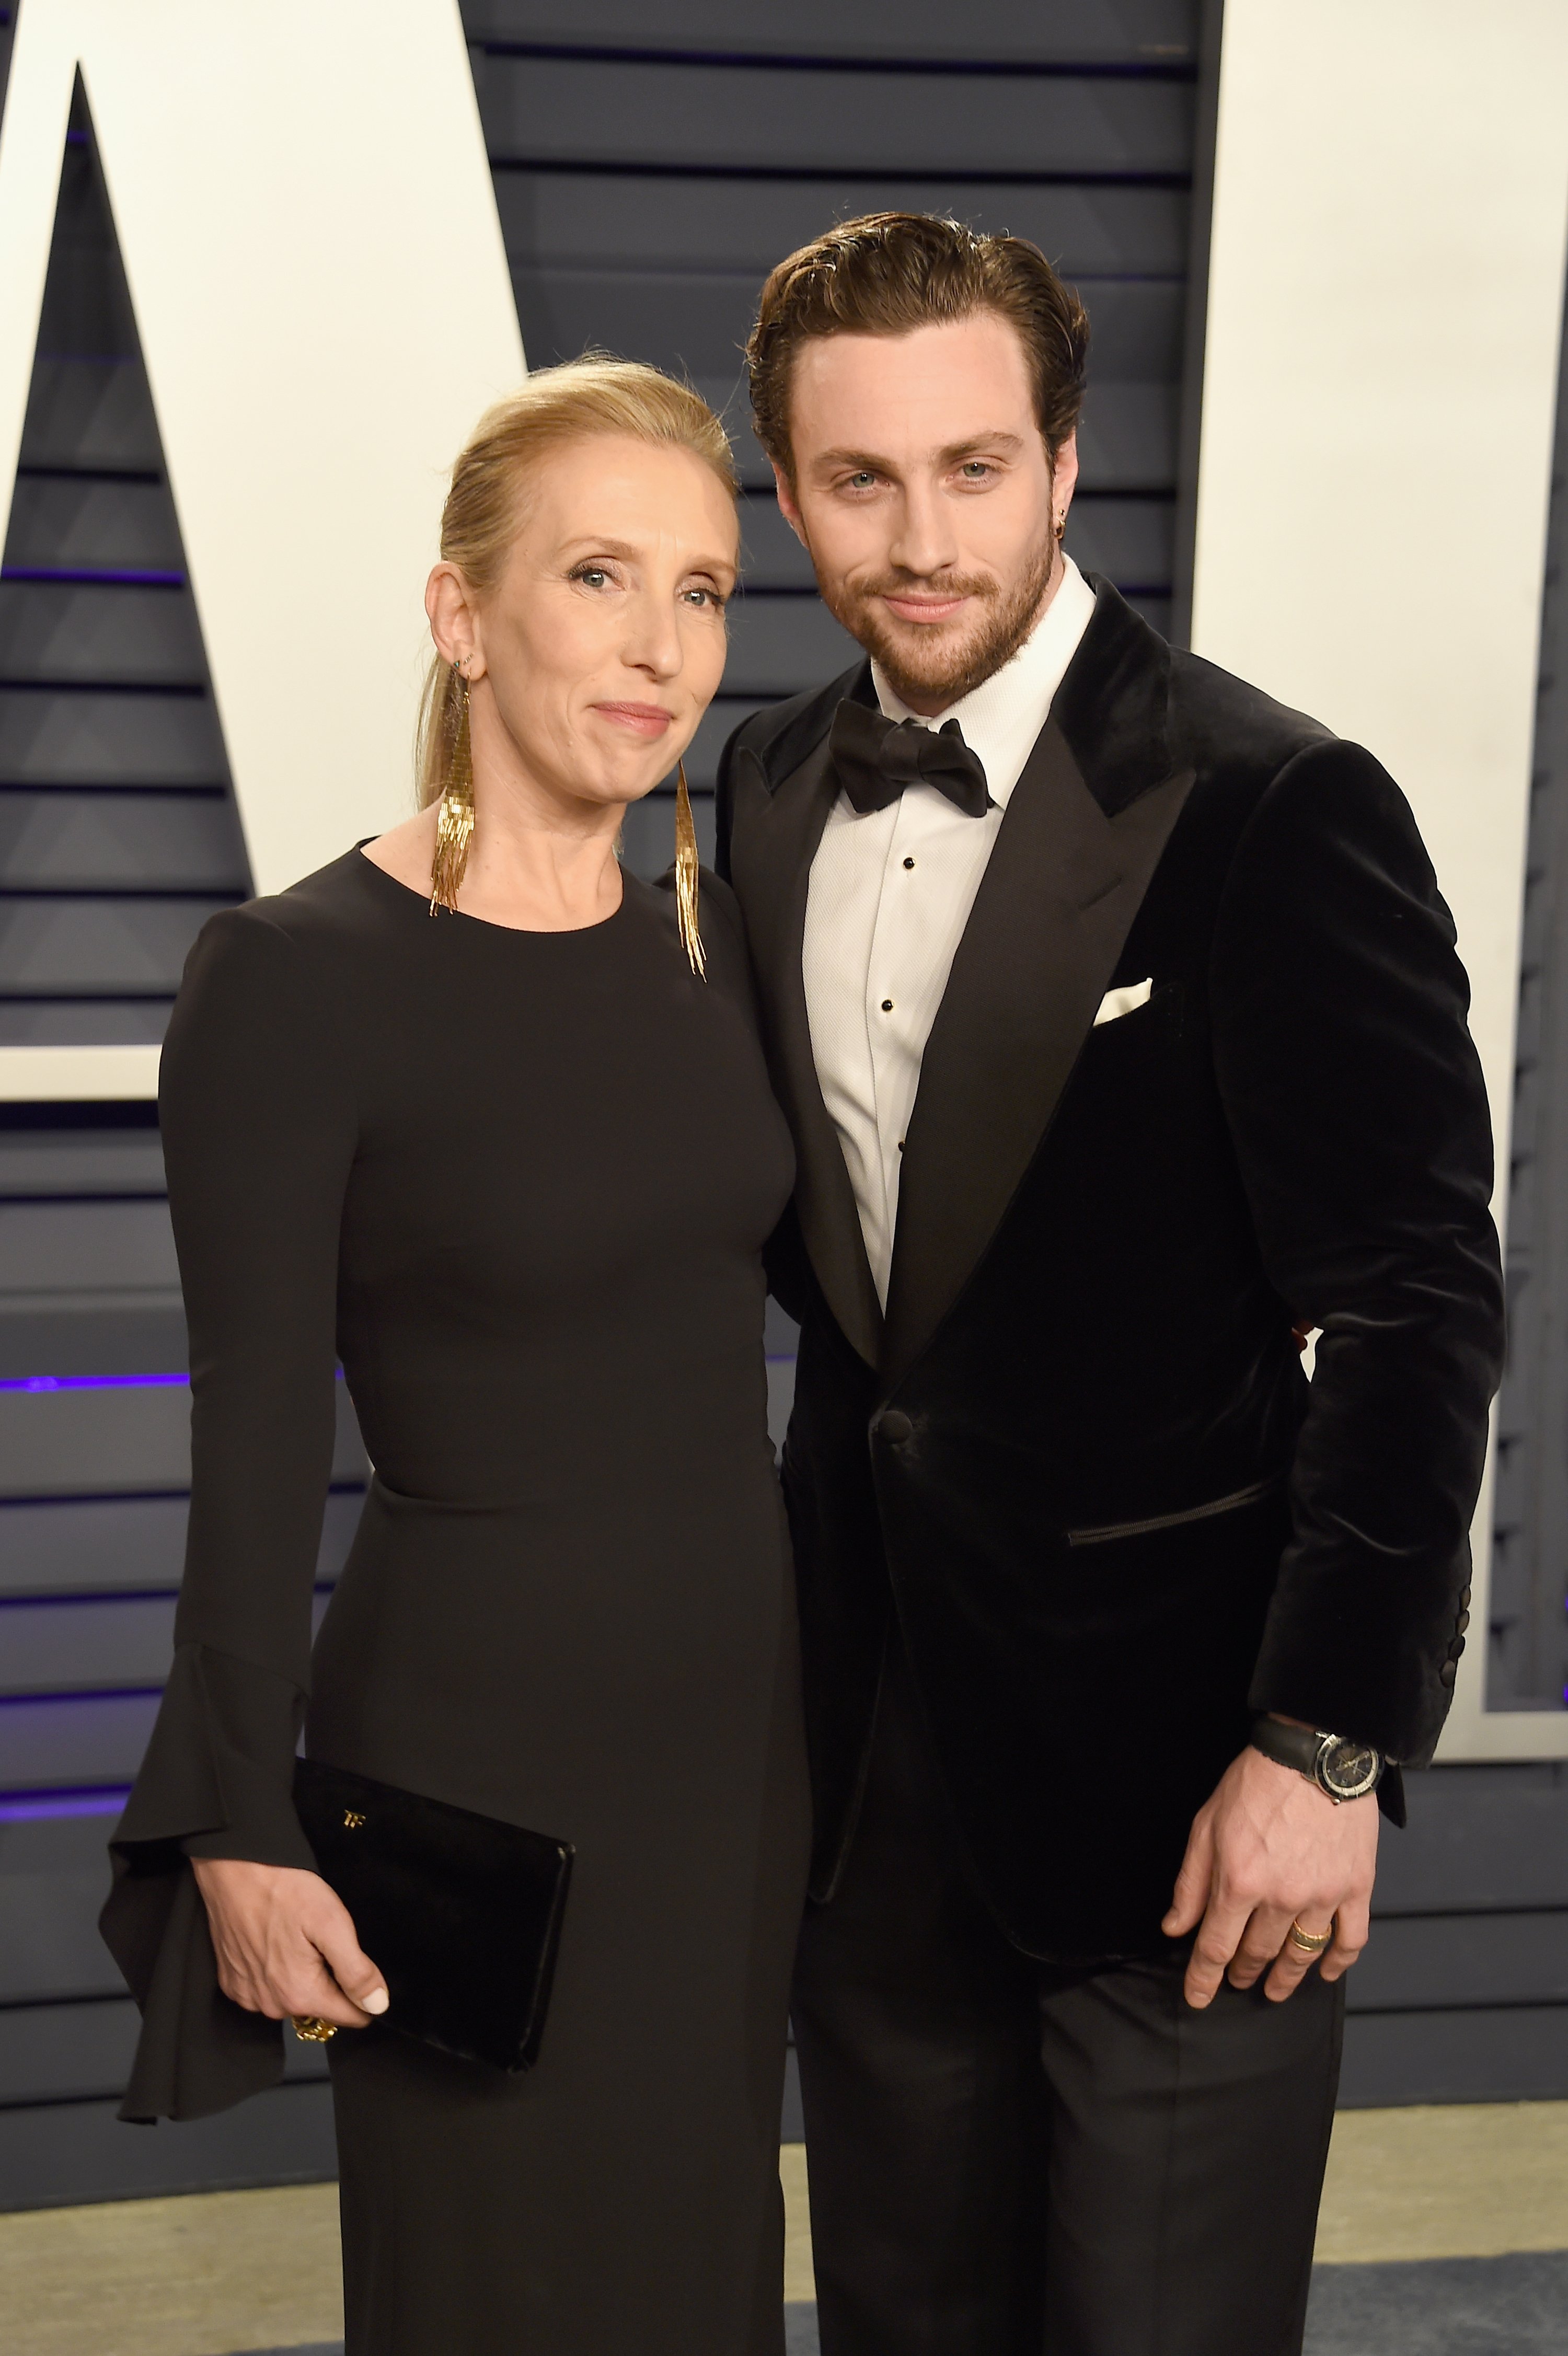 Sam and Aaron Taylor-Johnson attend the 2019 Vanity Fair Oscar Party hosted by Radhika Jones on February 24, 2019, in Beverly Hills, California. | Source: Getty Images